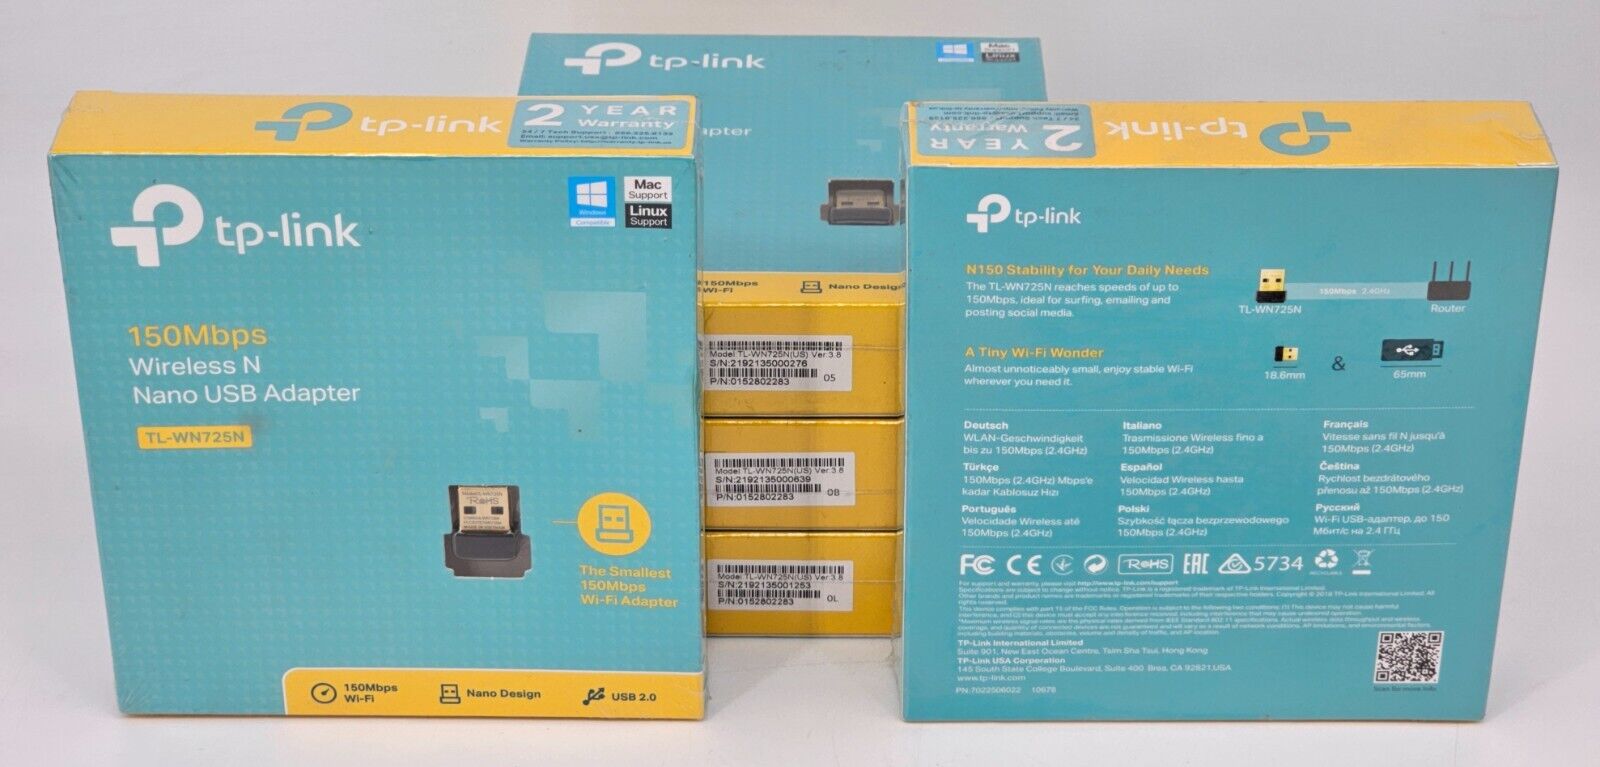 LOT OF 5 - TP-Link TL-WN725N 150Mbps Wireless N Nano USB Adapter Dongle - NEW